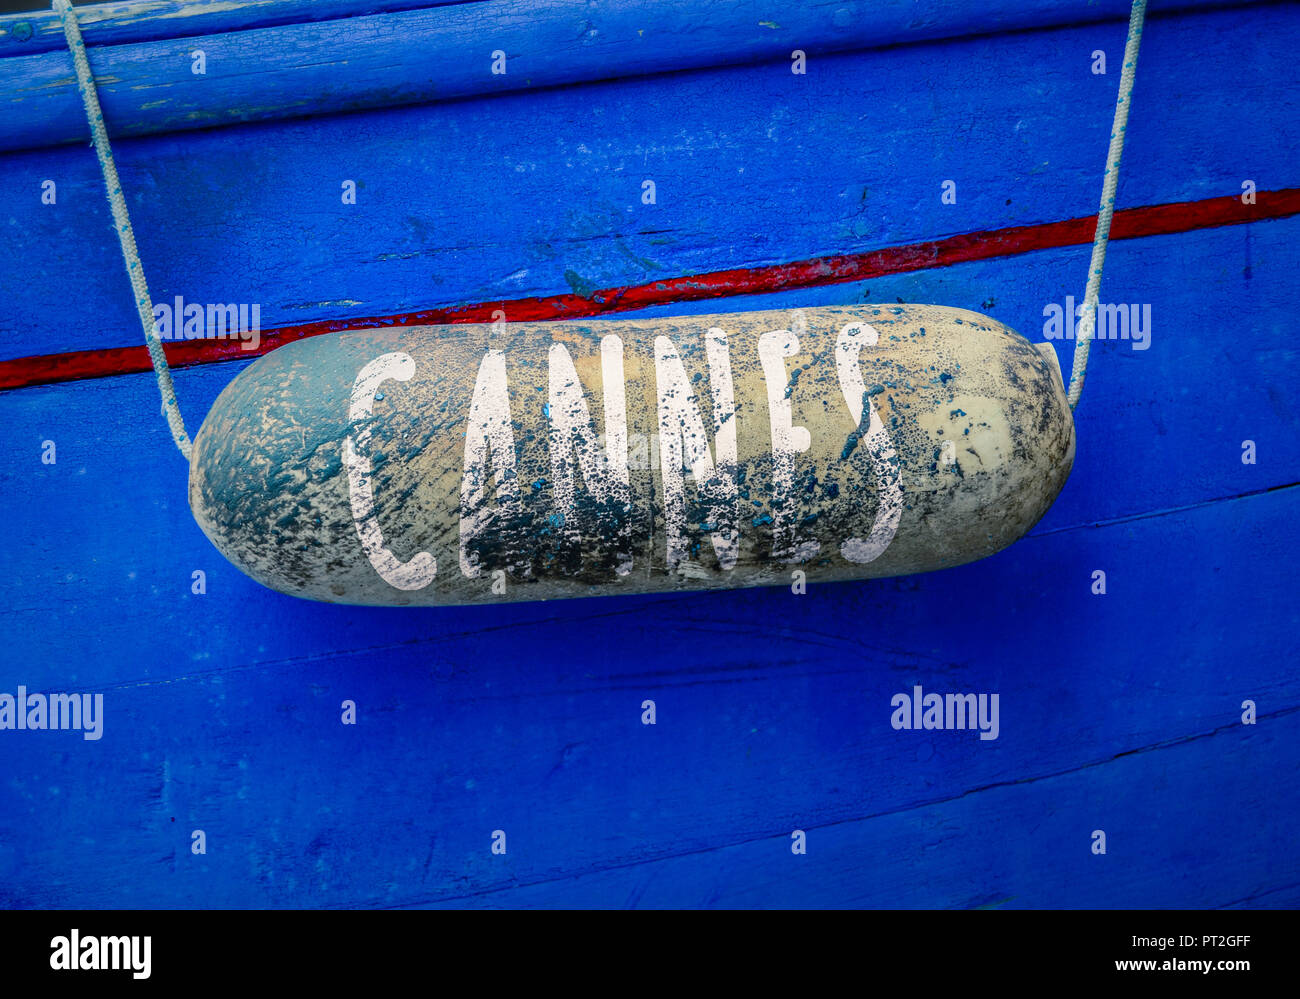 A Sign For Cannes, Famous For The Film Festival, Written On A Buoy Of A Rustic Boat Stock Photo